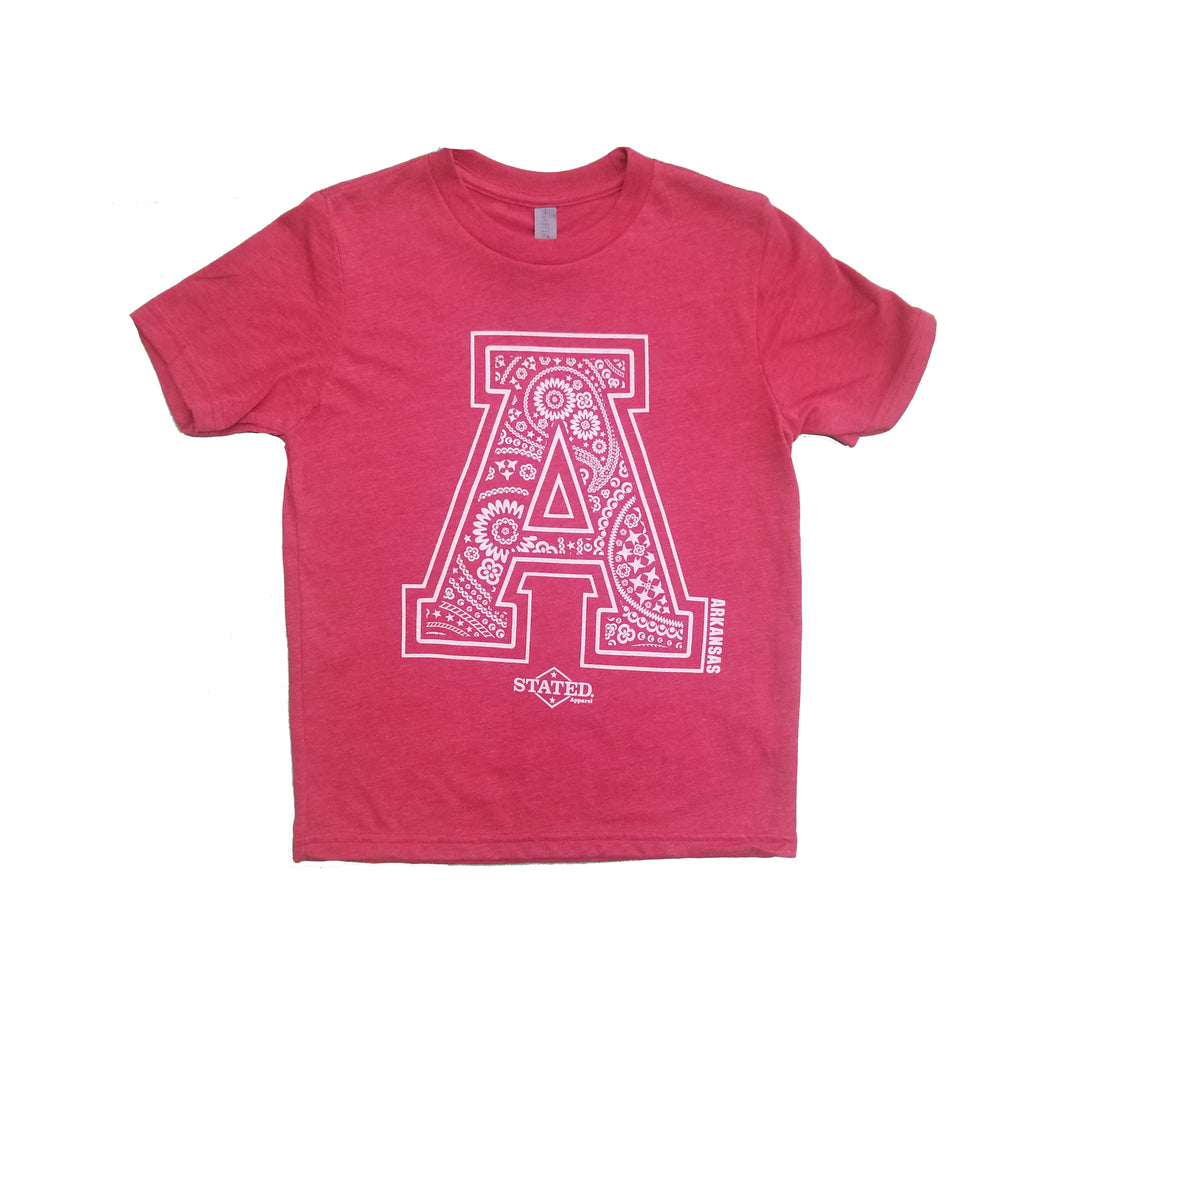 Stated Apparel Youth Paisley T-Shirt